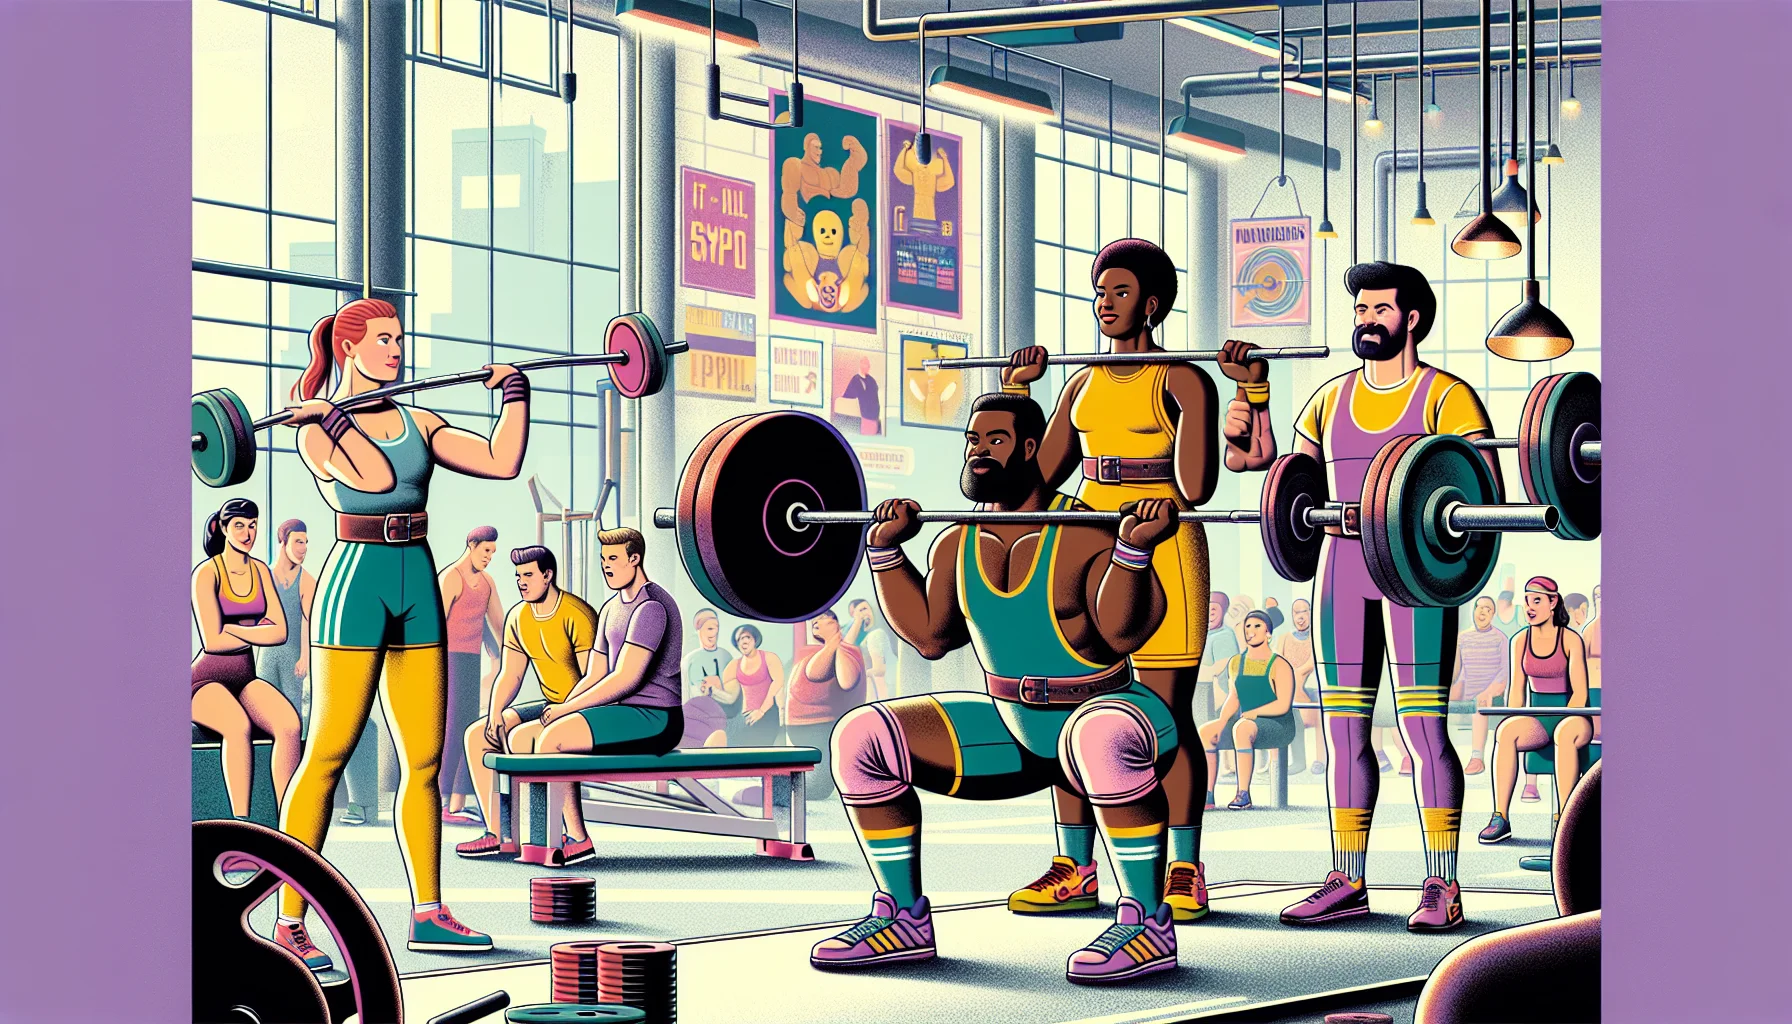 Create an amusing and encouraging scene of a four-day powerlifting split in a gym. In the image, four fitness enthusiasts of various descents and genders are working out, each focused on a different exercise. A Caucasian woman is performing squats, a Hispanic man is executing deadlifts, a Black woman is doing bench press, and a South Asian man is busy with overhead press. They are all wearing colorful workout clothes and the atmosphere in the gym is vibrant and energetic. The gym's background is filled with various fitness equipment, motivational posters and a few bystanders watching and cheering them on.